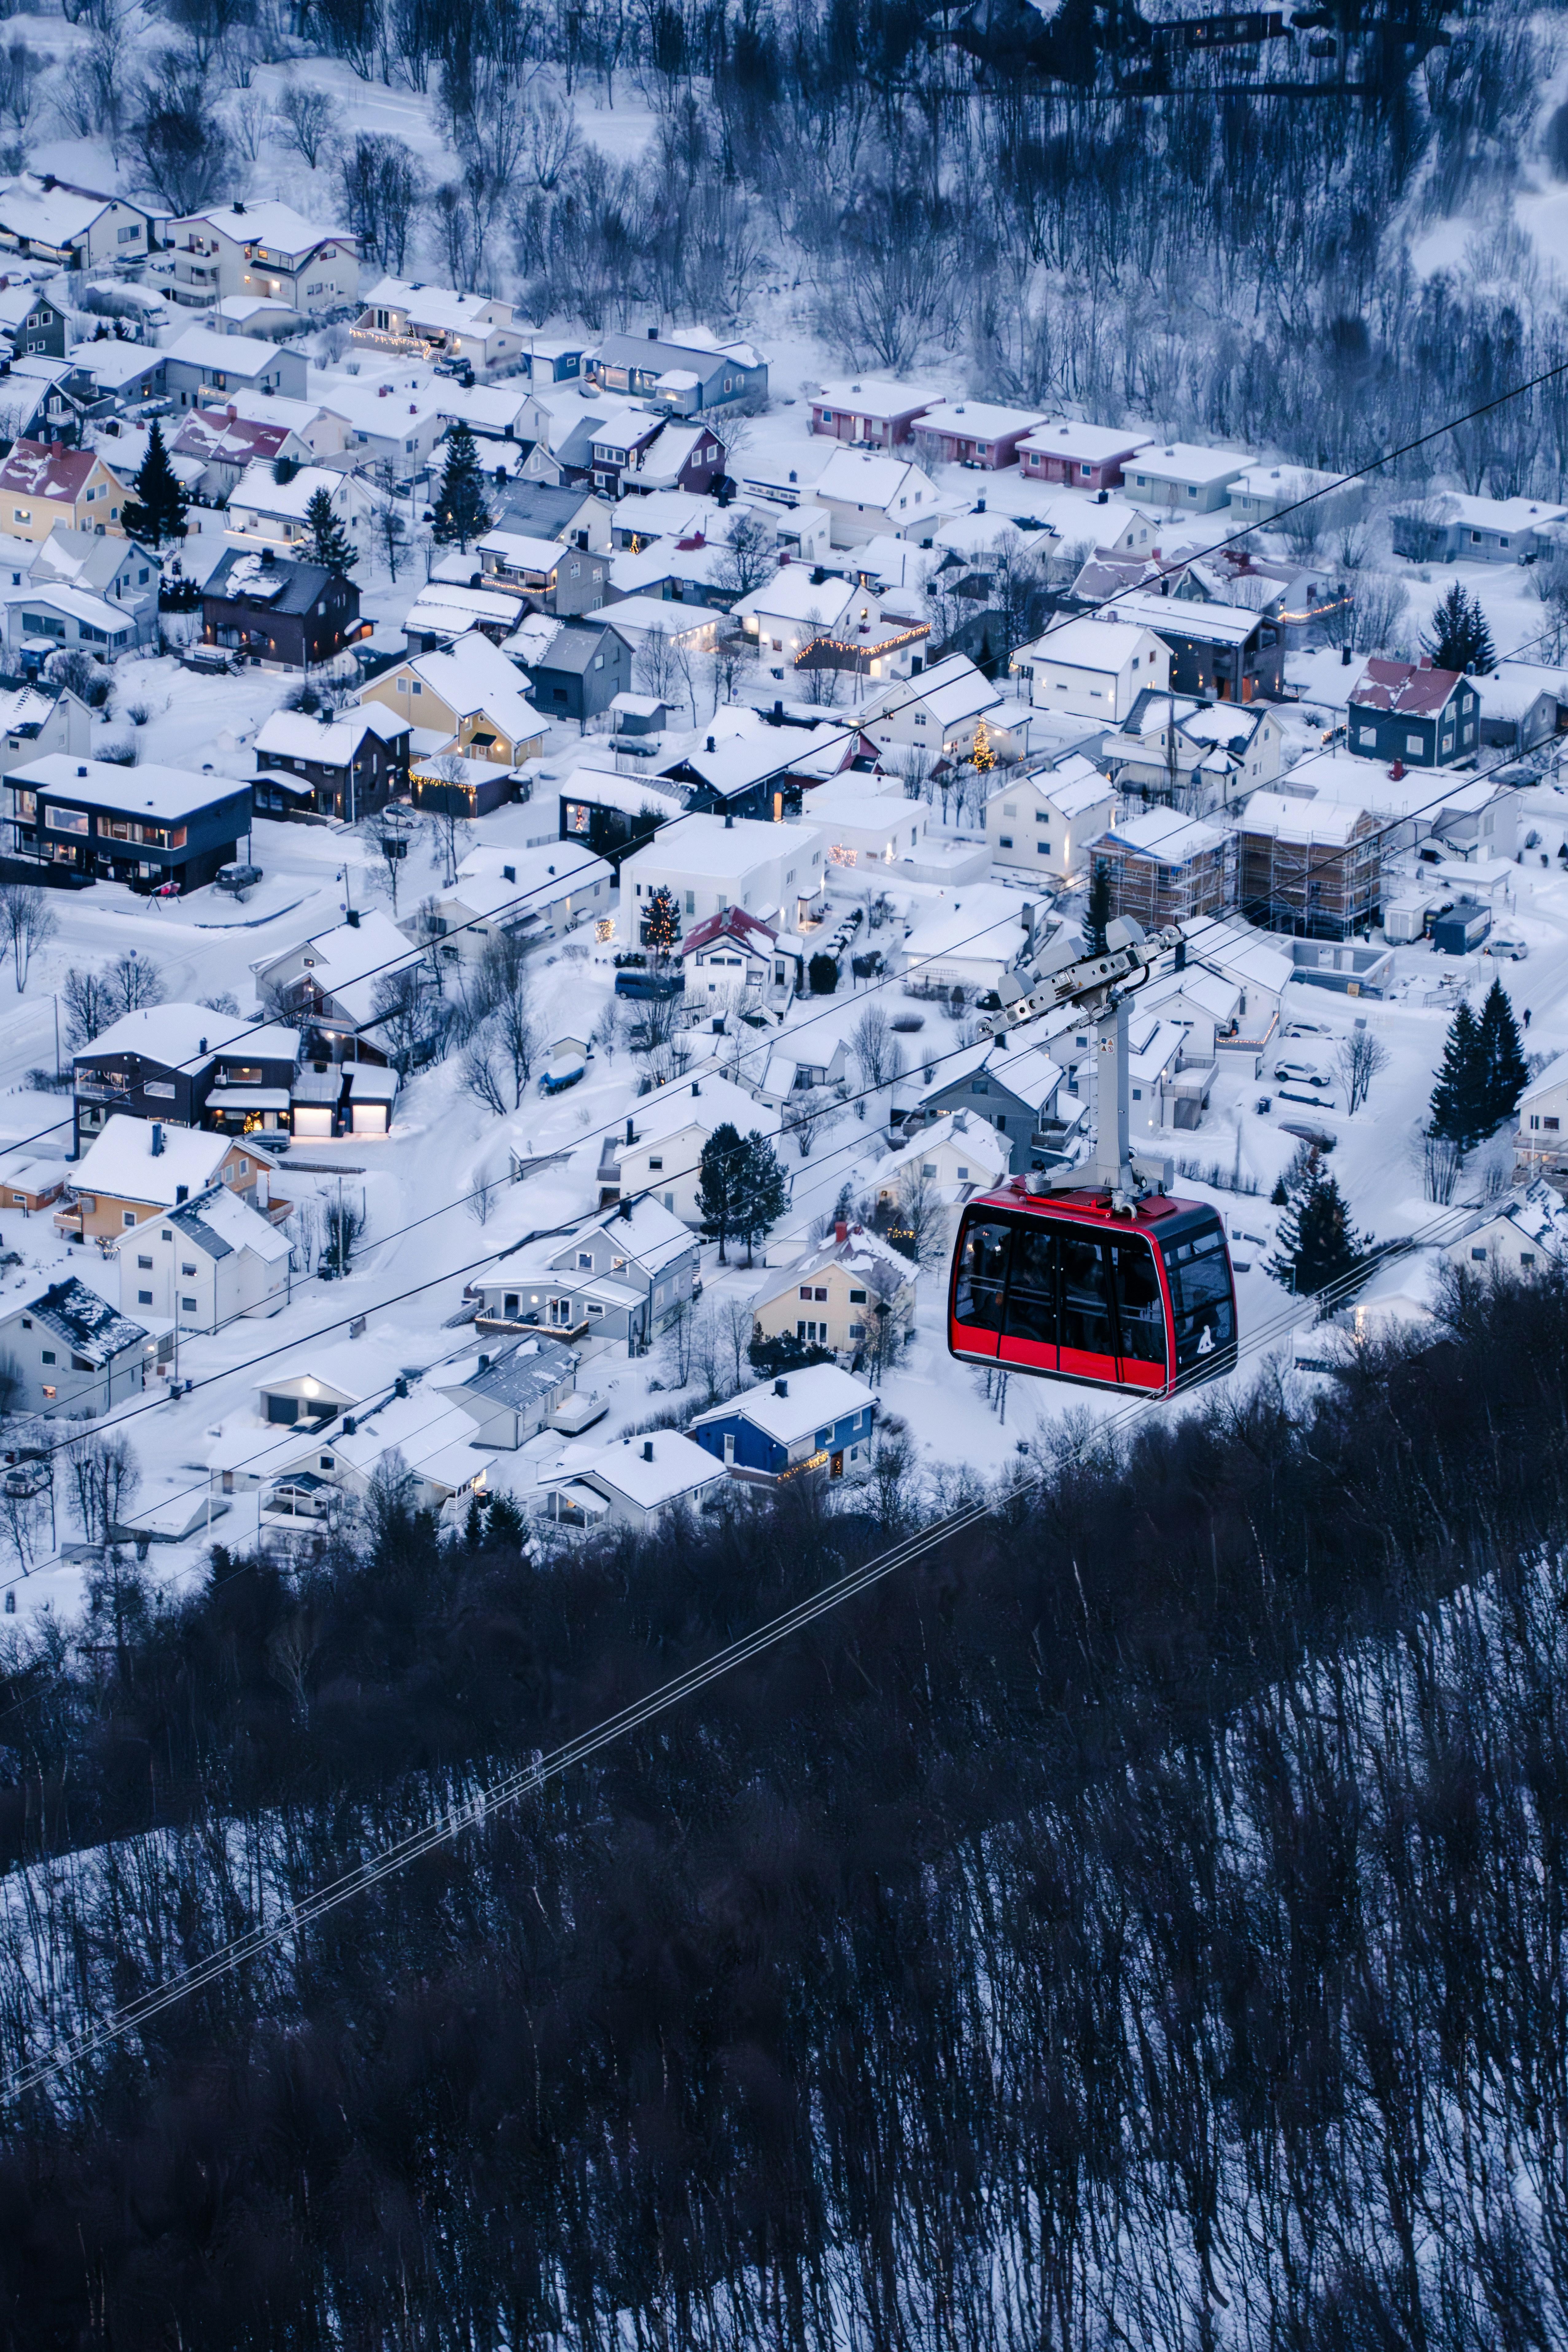 A small mountain cable car bringing people up to the top of the mountain.